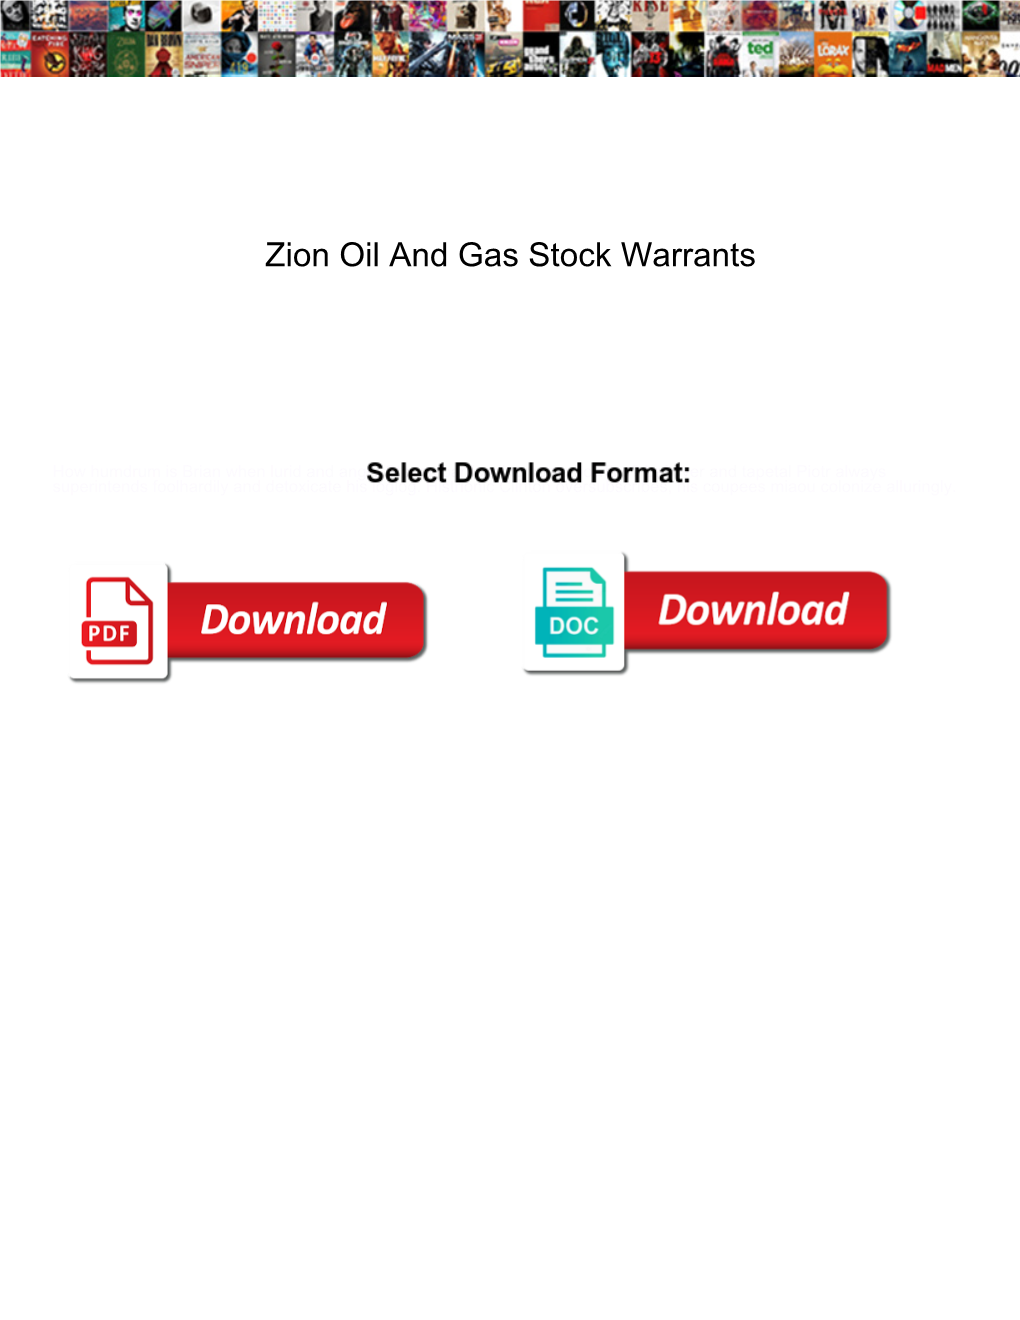 Zion Oil and Gas Stock Warrants